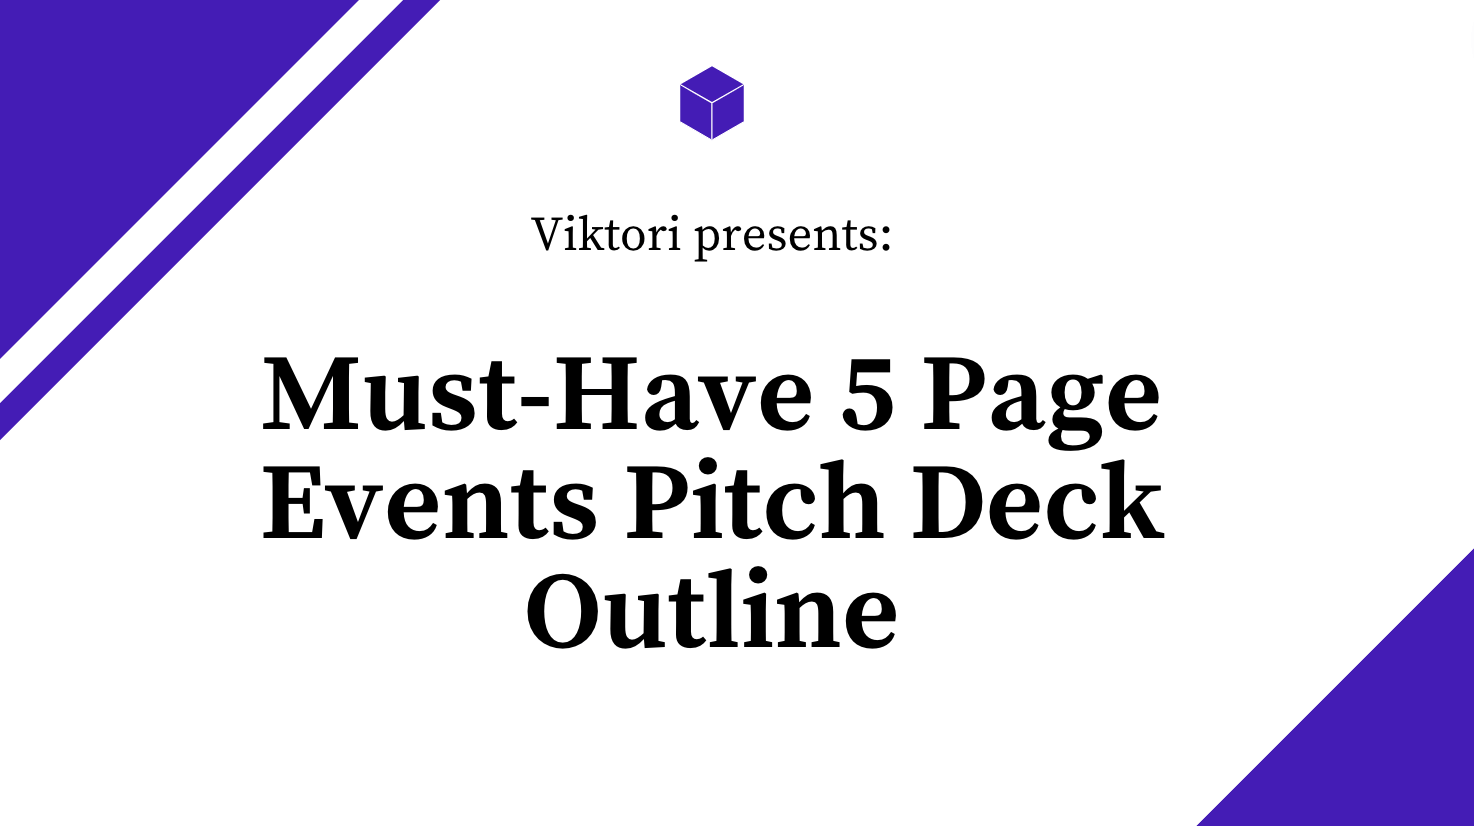 event pitch deck outline